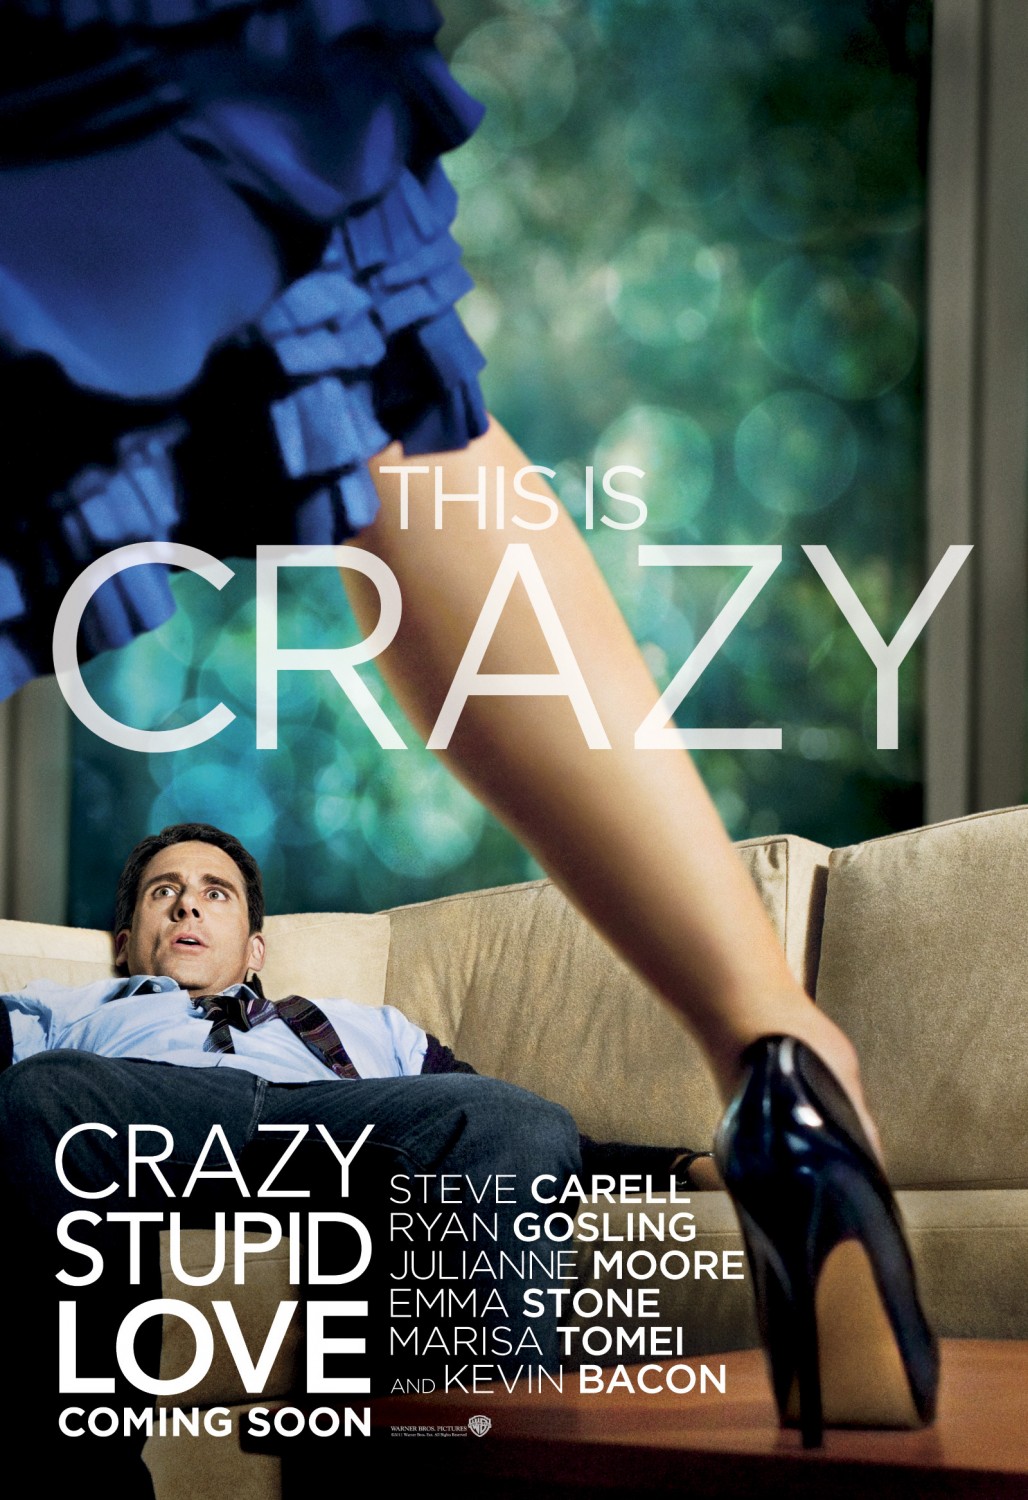 Extra Large Movie Poster Image for Crazy, Stupid, Love. (#5 of 7)